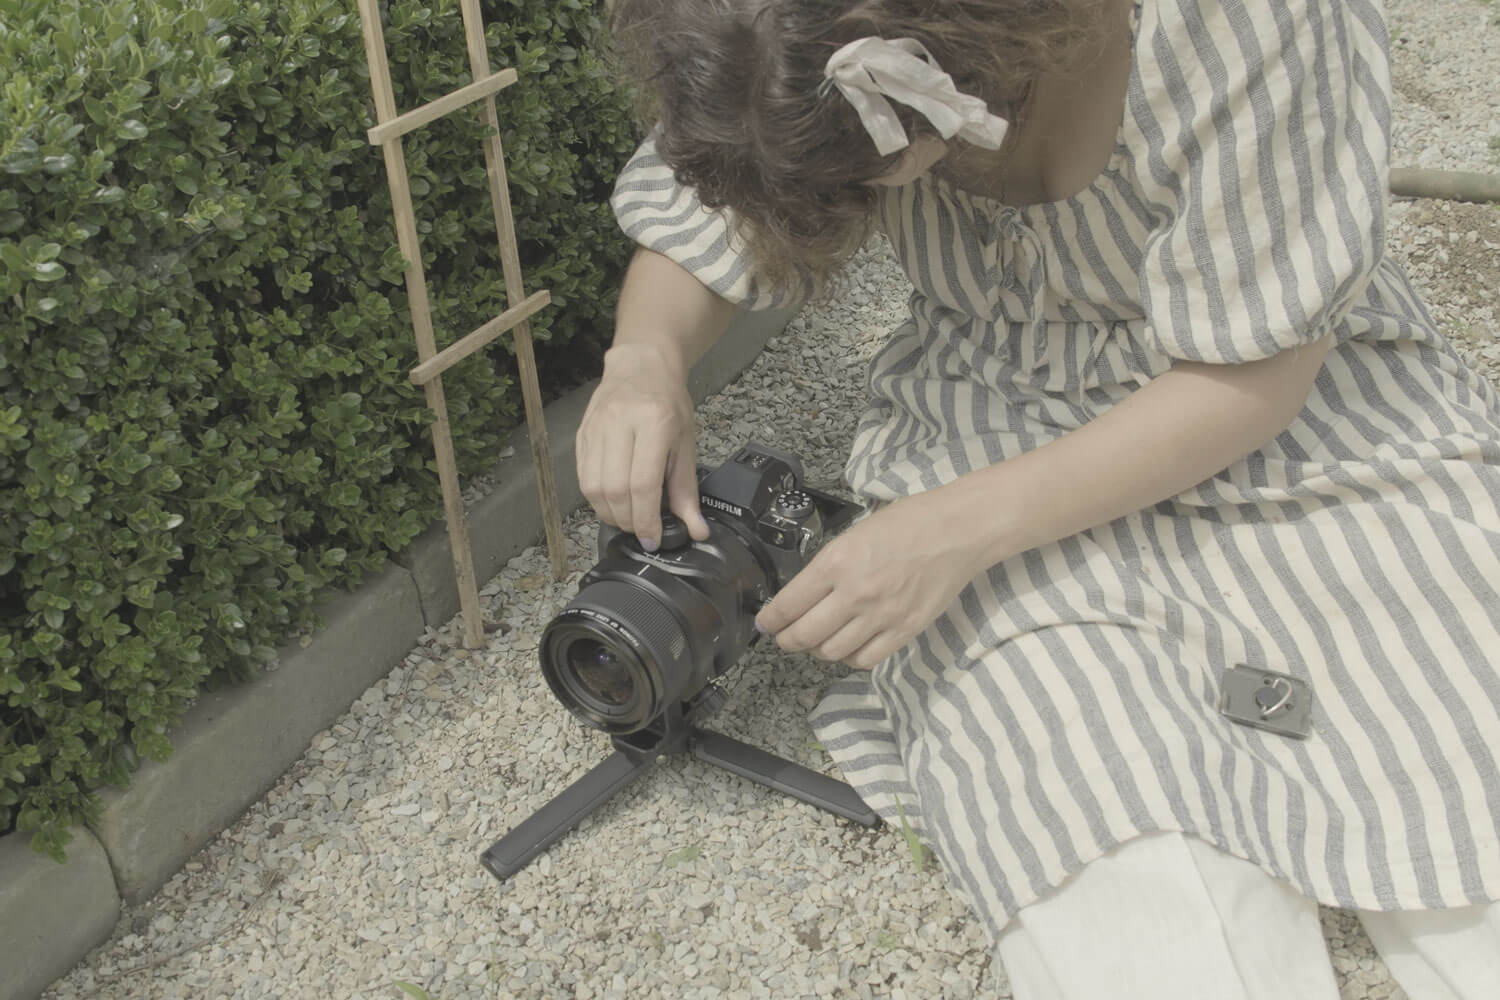 Woman setting up camera for photoshoot in garden